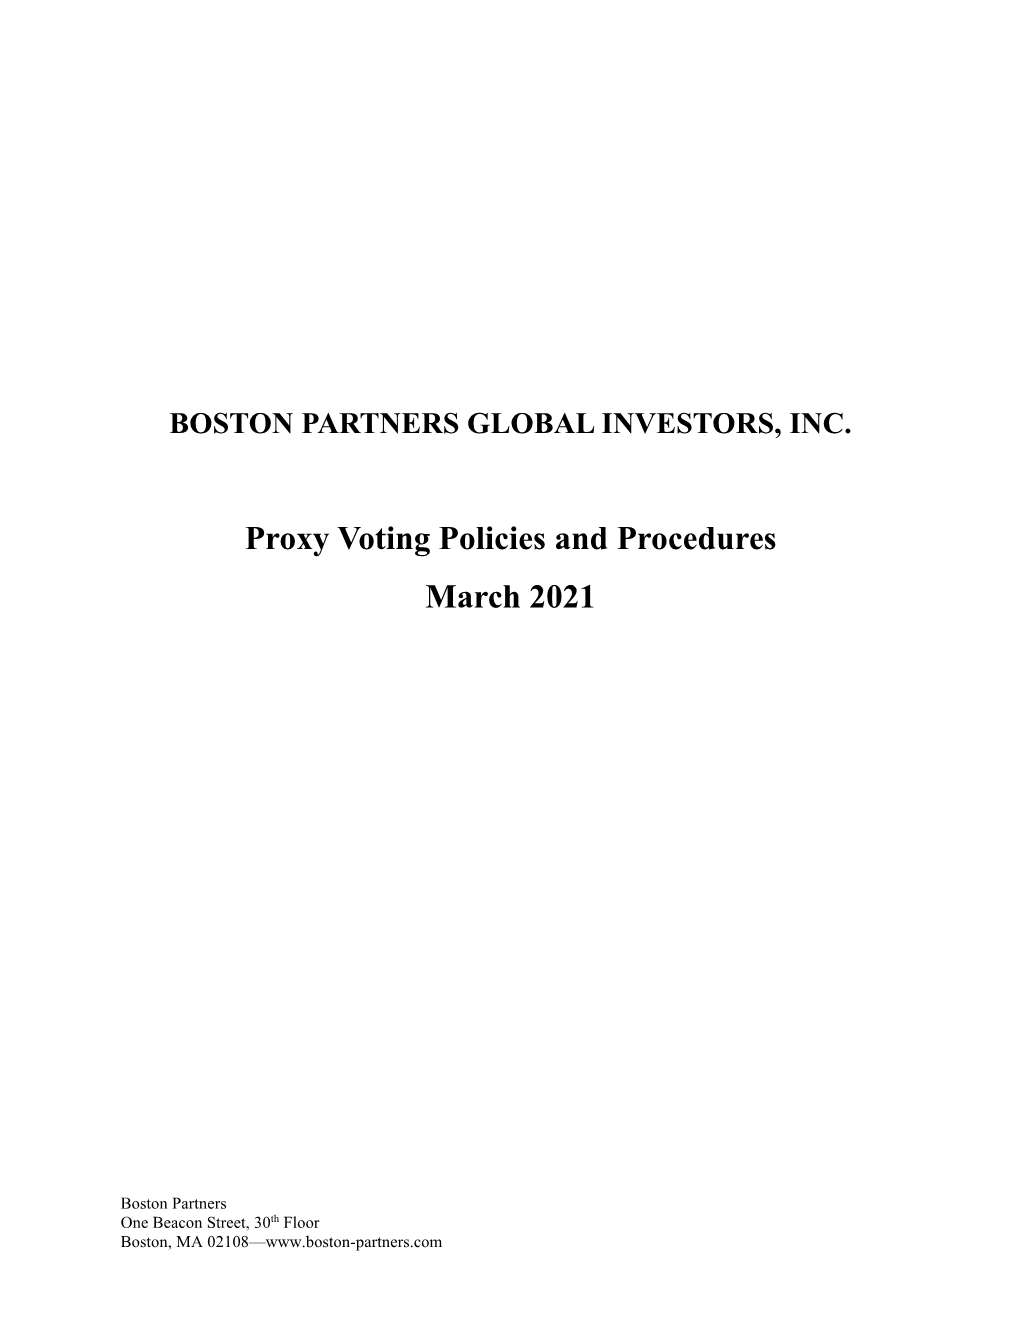 Proxy Voting Policies and Procedures March 2021